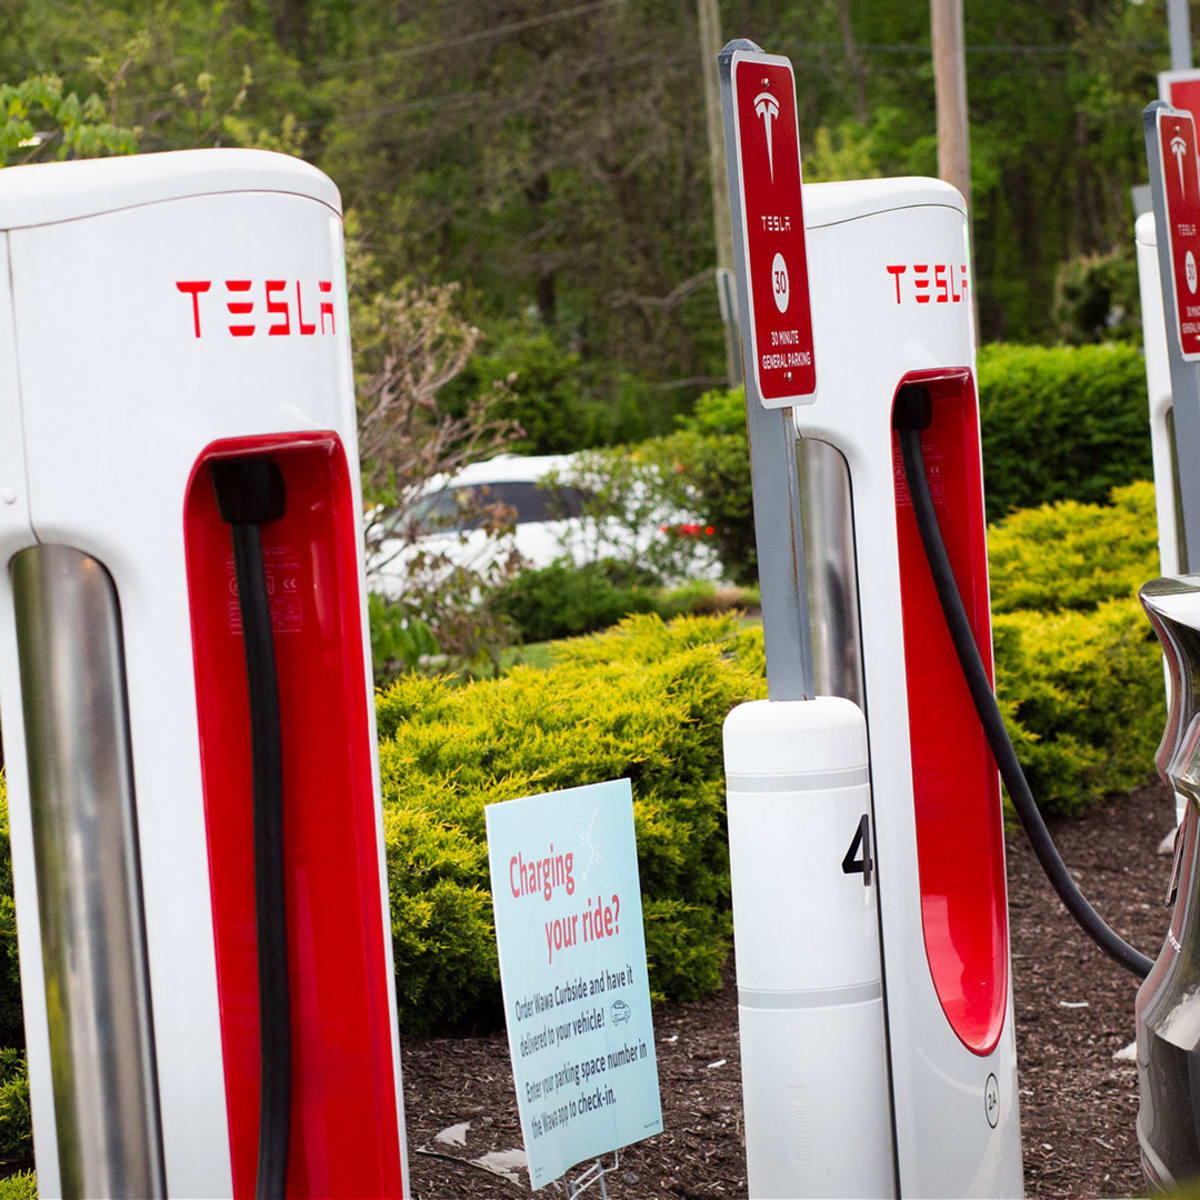 All about Tesla's charging station - Beev